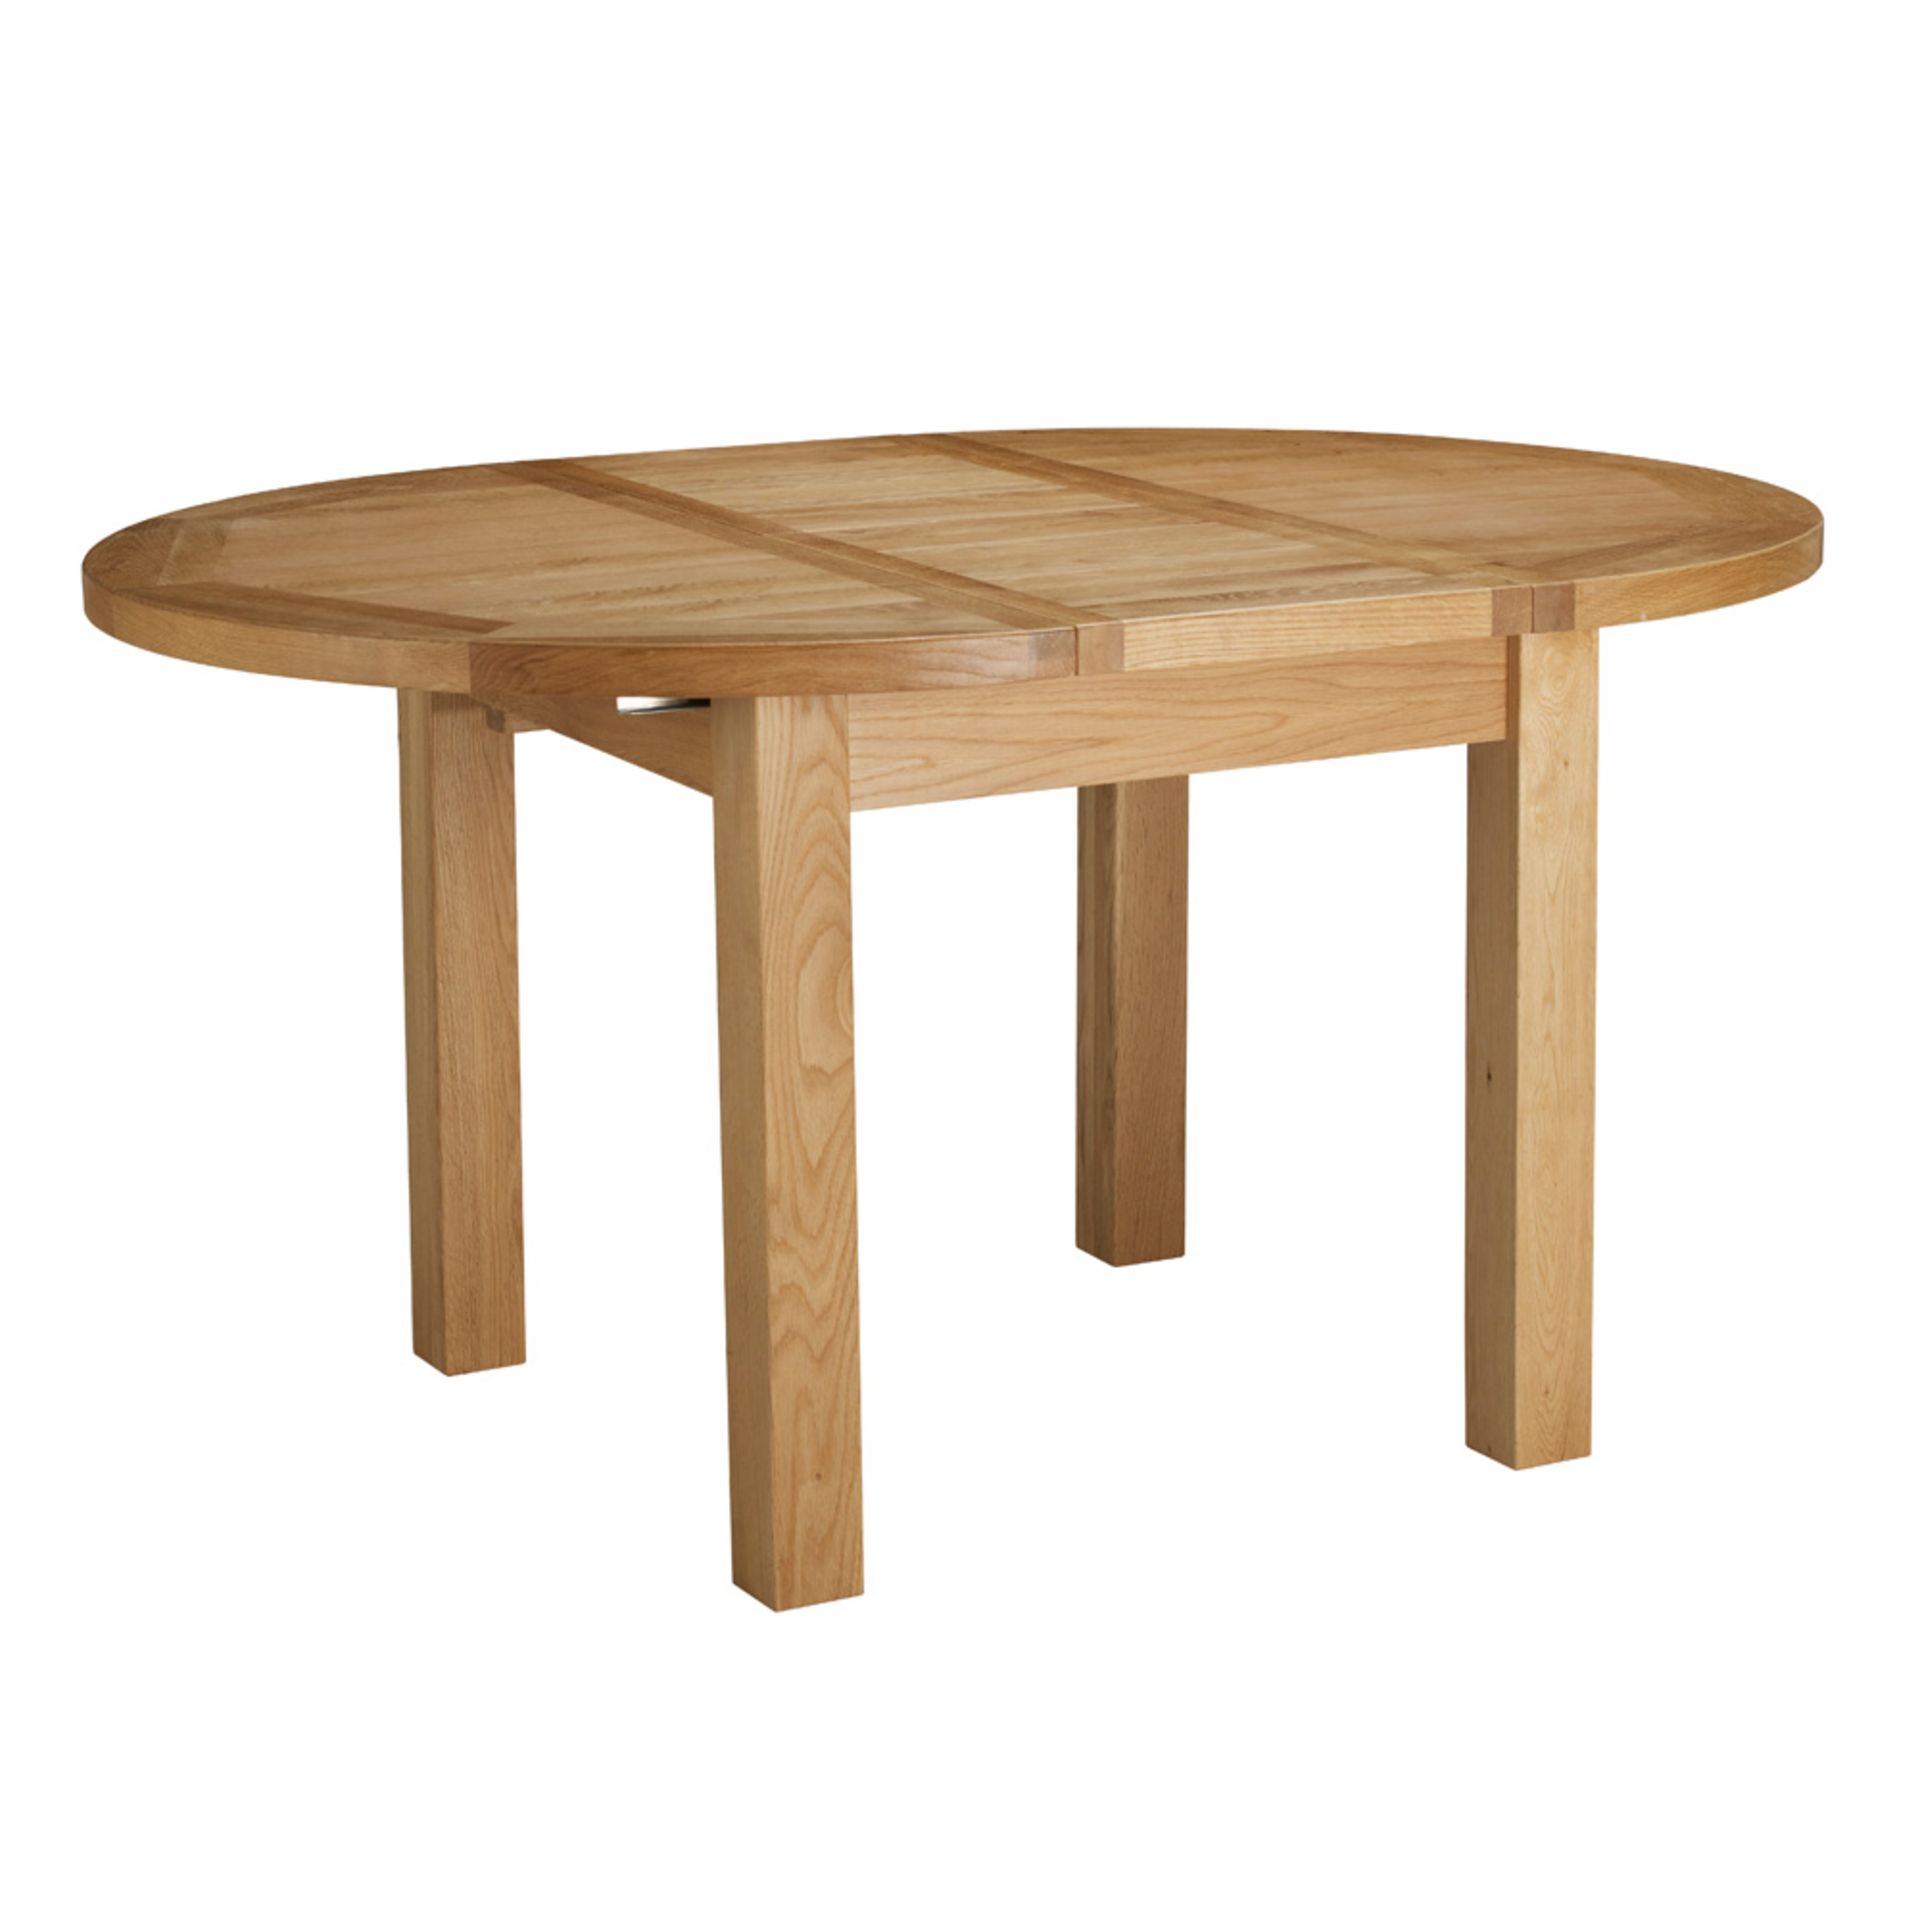 V Brand New Chiswick Oak Round Butterfly Extension Table 107/145w x 90d x 77h cms ISP £760.00 (